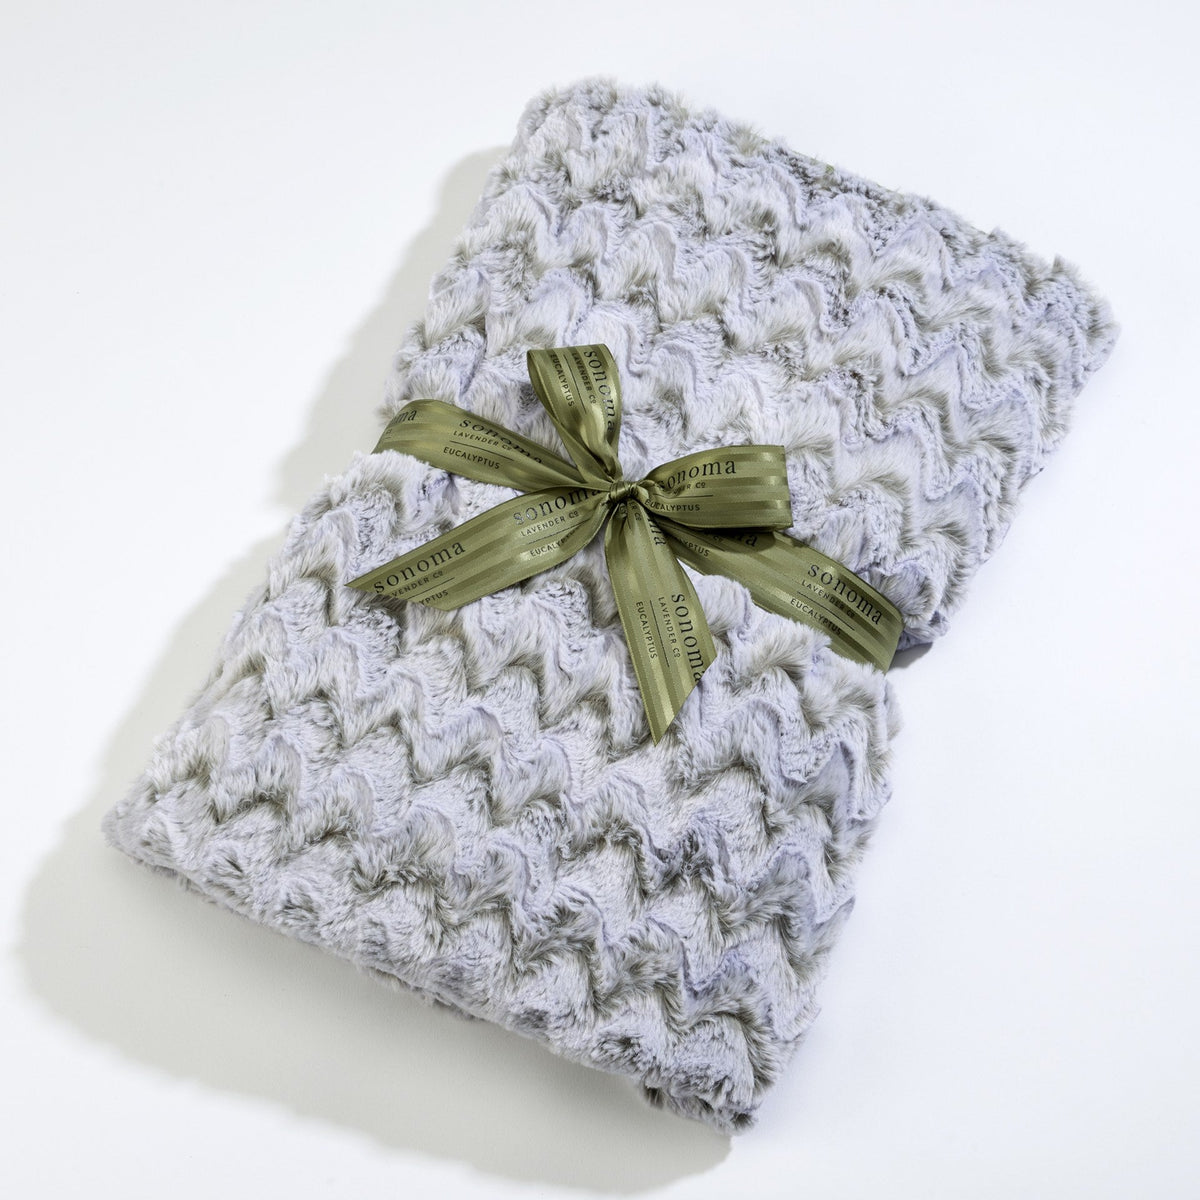 A Sonoma Lavender knitted scarf with a textured pattern, neatly folded and tied with a shiny olive green ribbon featuring gold text, infused with eucalyptus lavender.